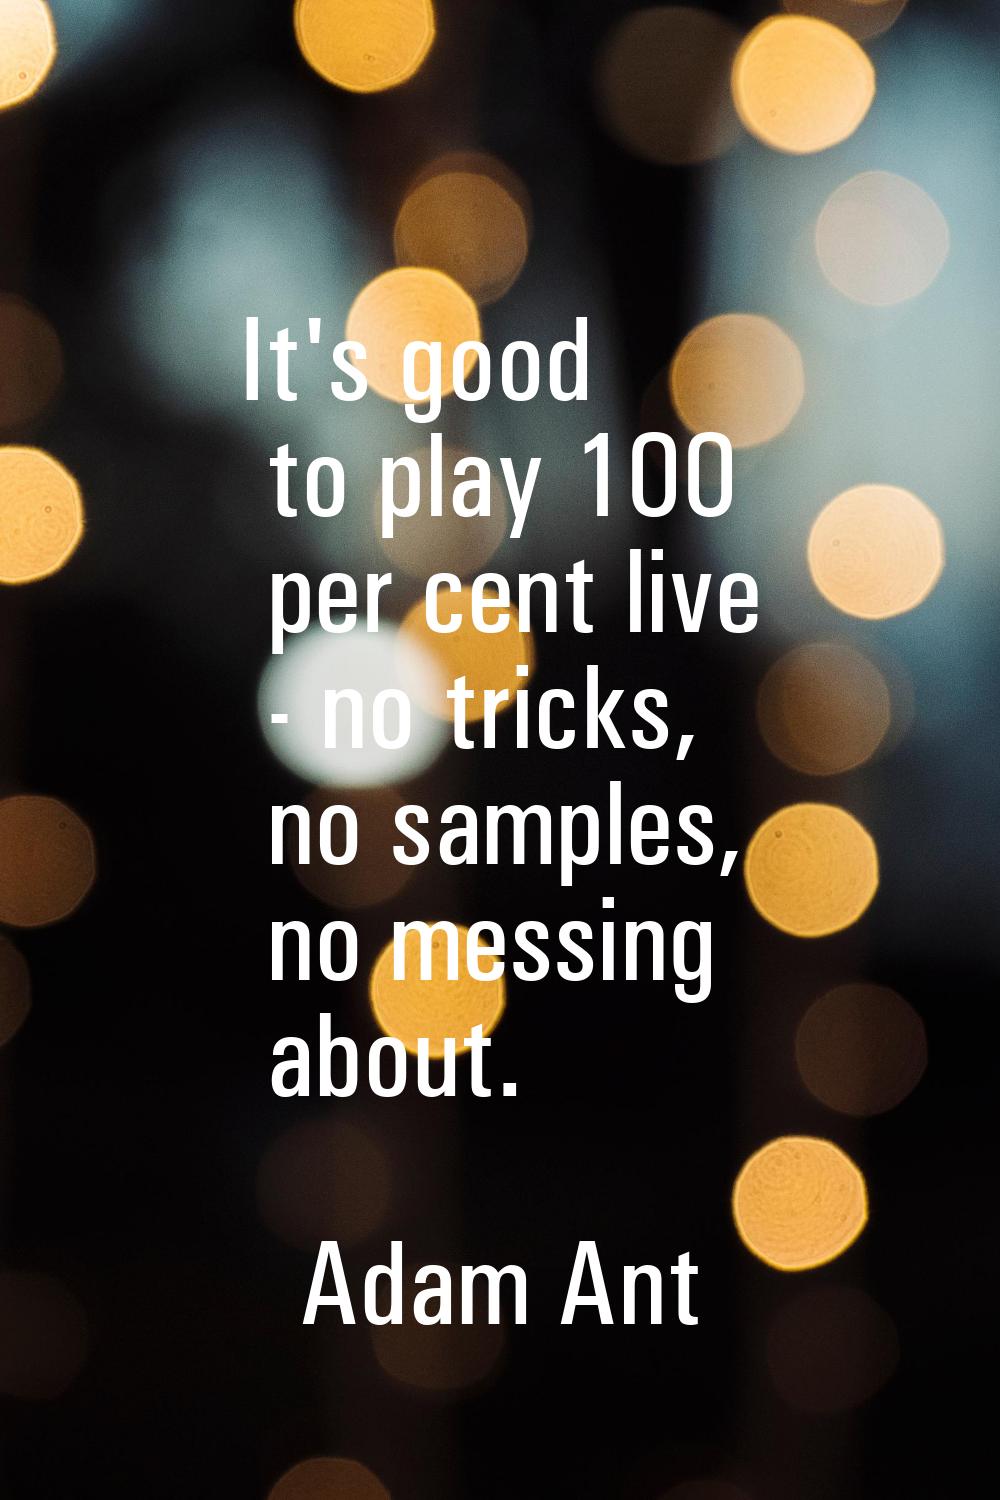 It's good to play 100 per cent live - no tricks, no samples, no messing about.